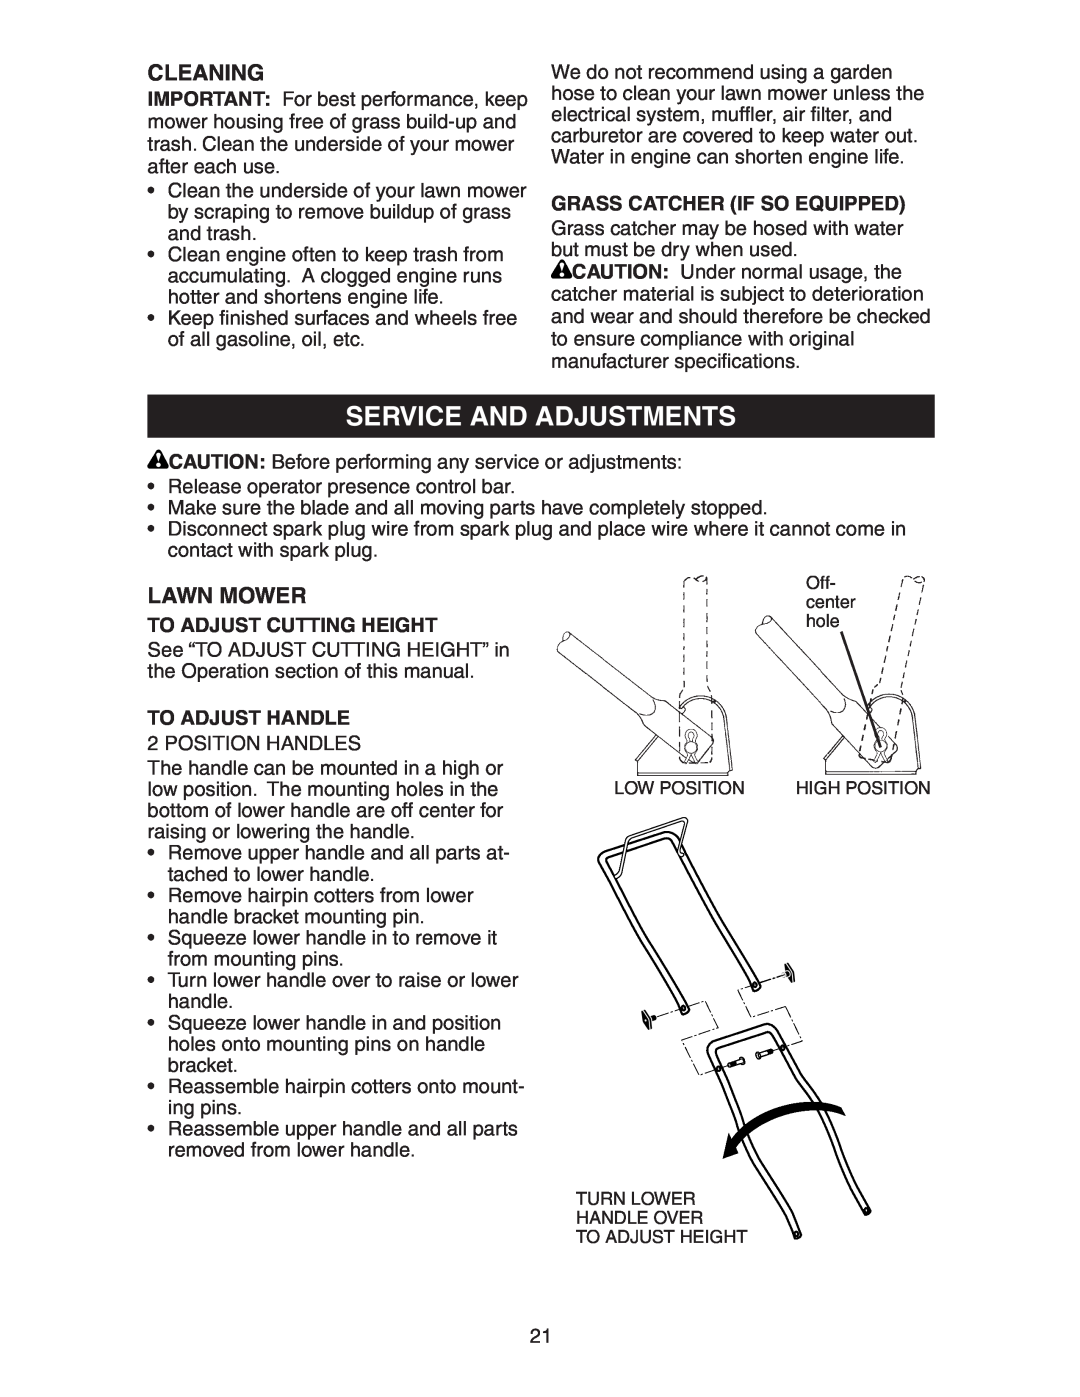 Poulan 172787 manual Service And Adjustments, Cleaning, To Adjust Cutting Height, To Adjust Handle, Lawn Mower 